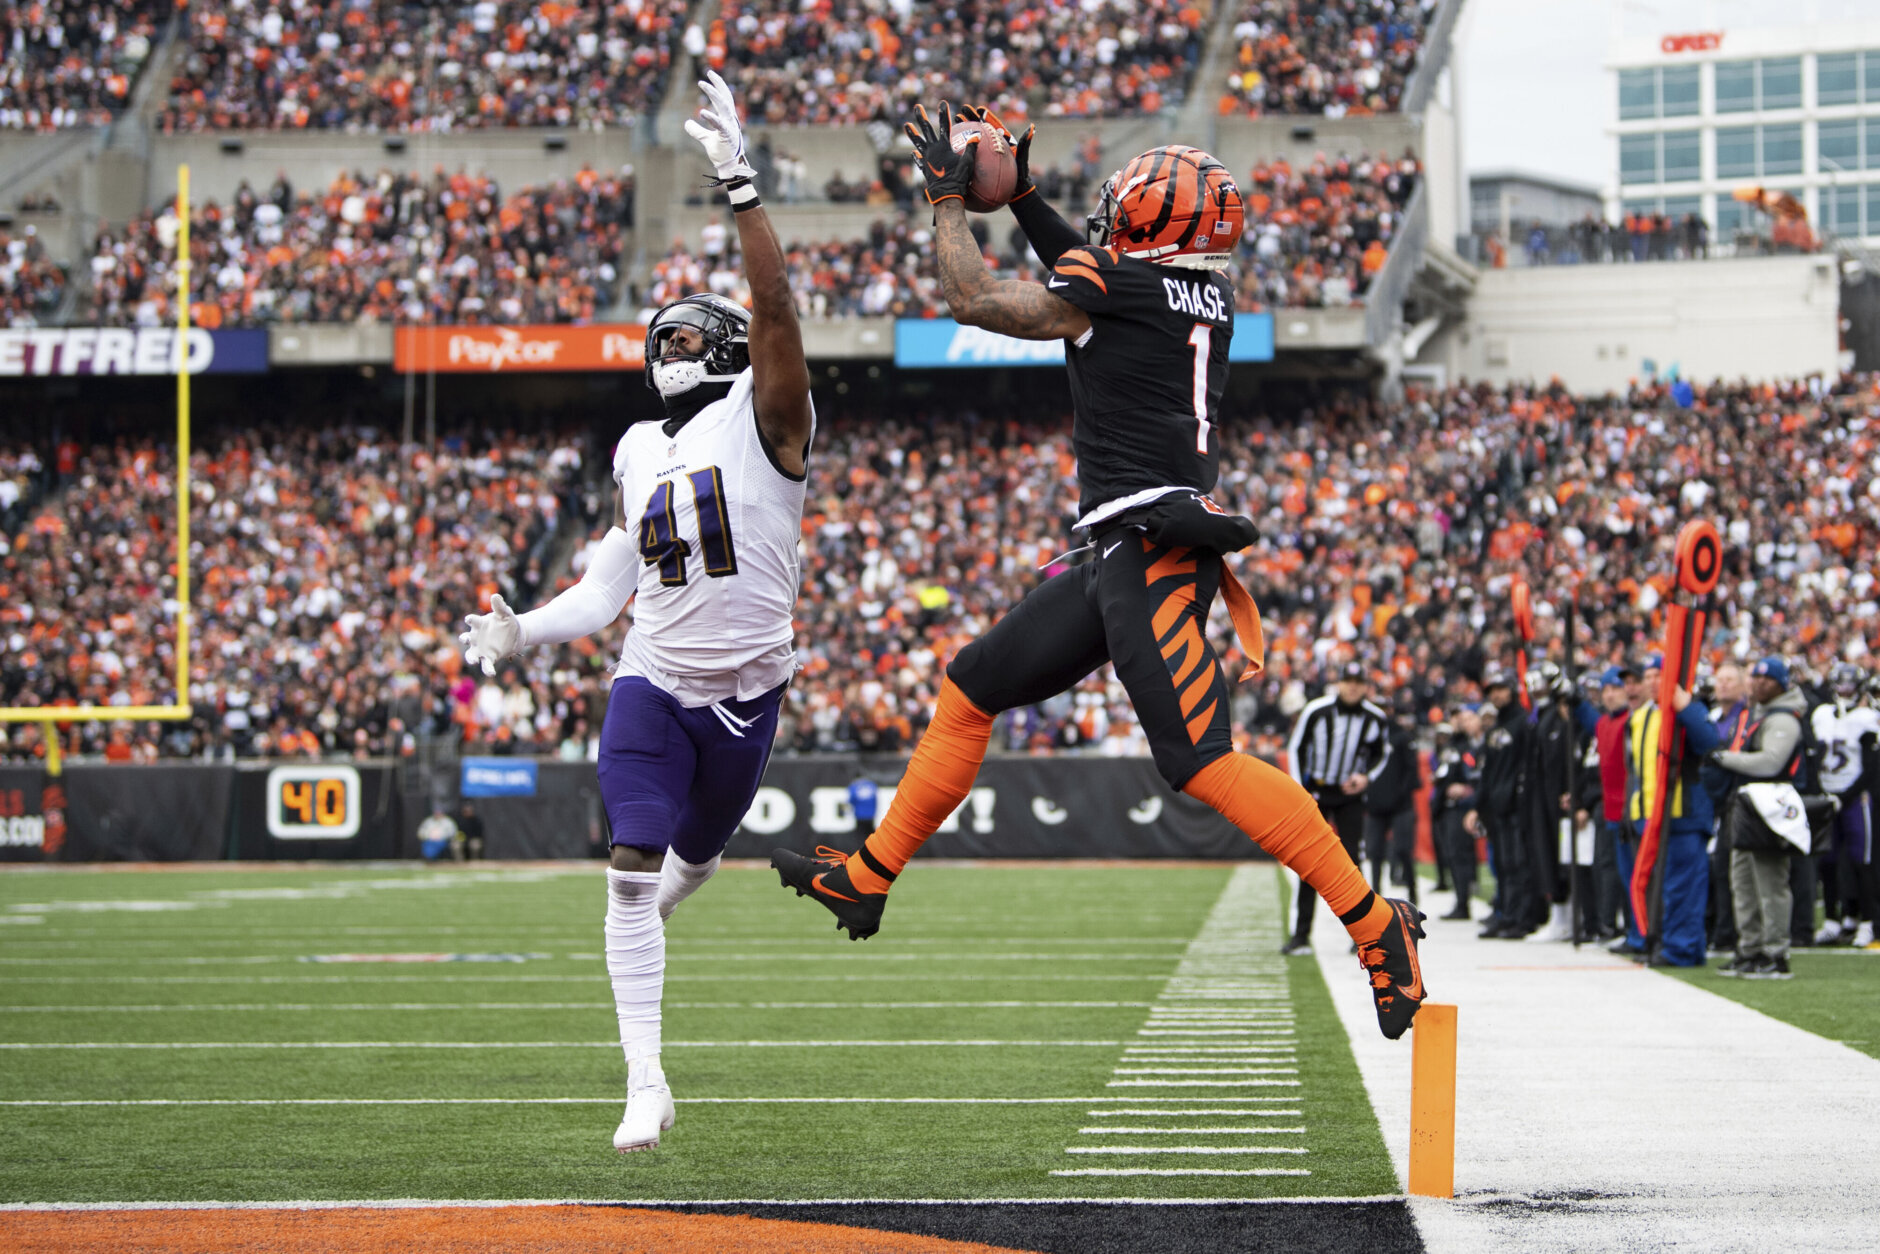 <p><b><i>Ravens 16</i></b><br />
<b><i>Bengals 27</i></b></p>
<p>Baltimore gets another crack at Cincinnati but I&#8217;m torn on whether that&#8217;s good or bad for the Ravens &#8212; on the one hand, the only way they&#8217;ve ever advanced to a Super Bowl is as a wild card underdog. But on the other hand, even if Lamar Jackson is back in time for the playoffs, Baltimore doesn&#8217;t stand a chance.</p>
<p>Why? Because when Cincy is in the midst of a franchise-record eight-game win streak with a QB with the swagger to say things like <a href="https://profootballtalk.nbcsports.com/2023/01/08/joe-burrow-our-window-is-always-open-because-the-window-is-my-whole-career/">the Bengals&#8217; championship window is always open because the window is his whole career</a>, methinks that team won&#8217;t lose at home to a rusty QB on an injury-riddled roster.</p>
